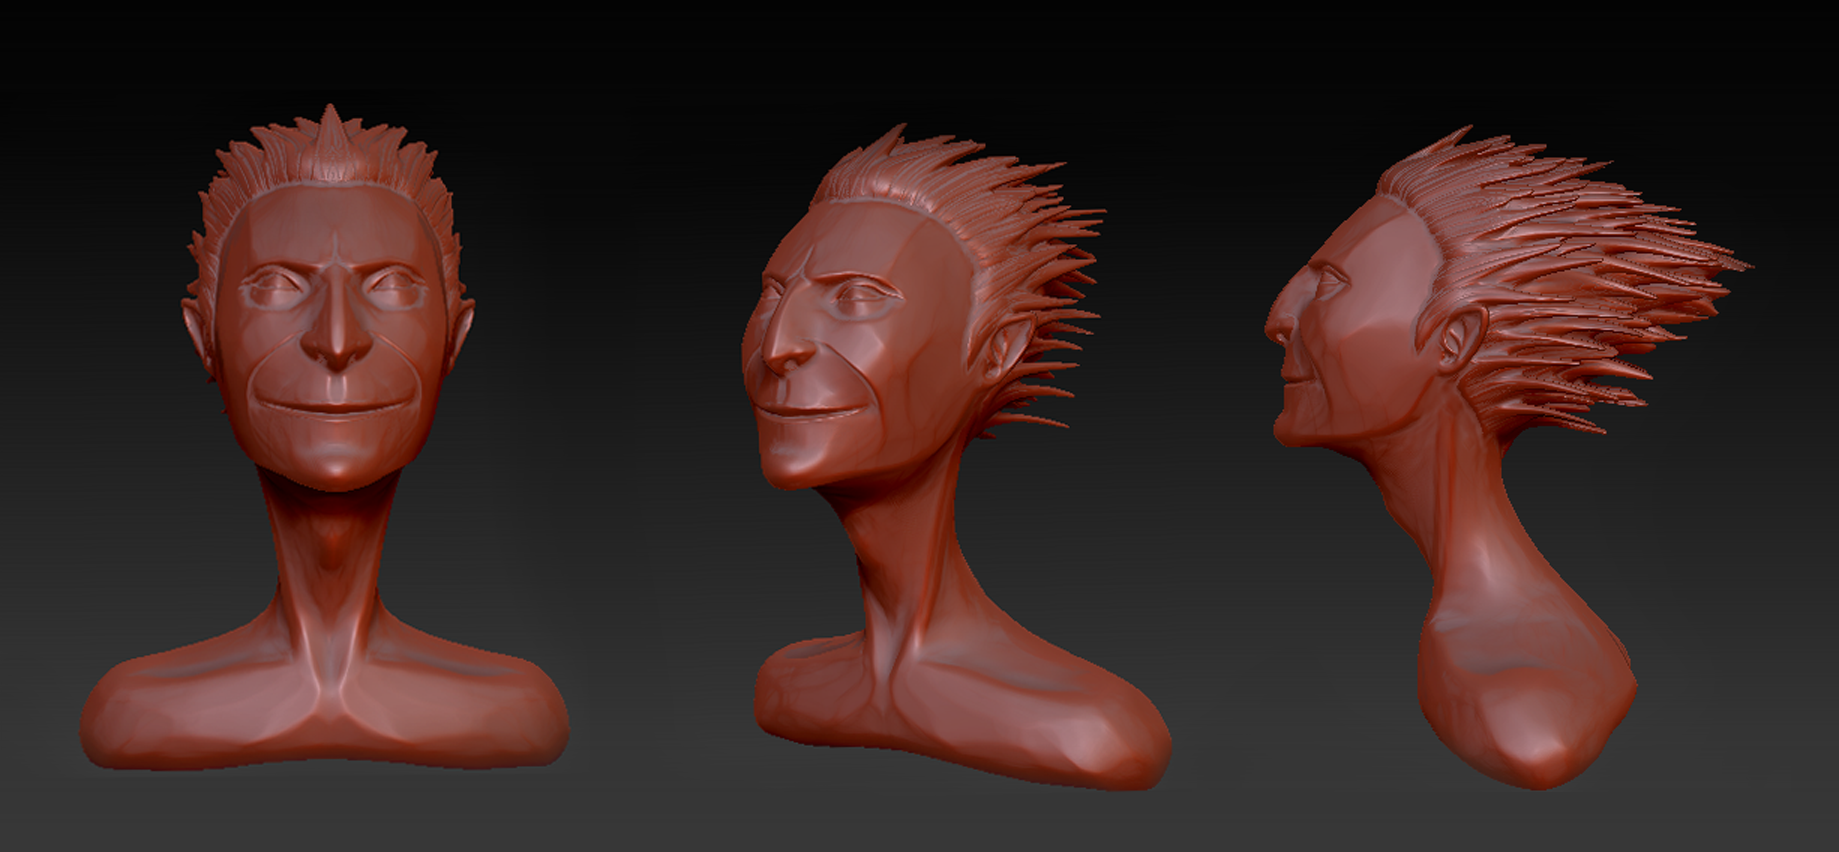 learning_zbrush___02_by_gingeradventures-d67xm8r.png